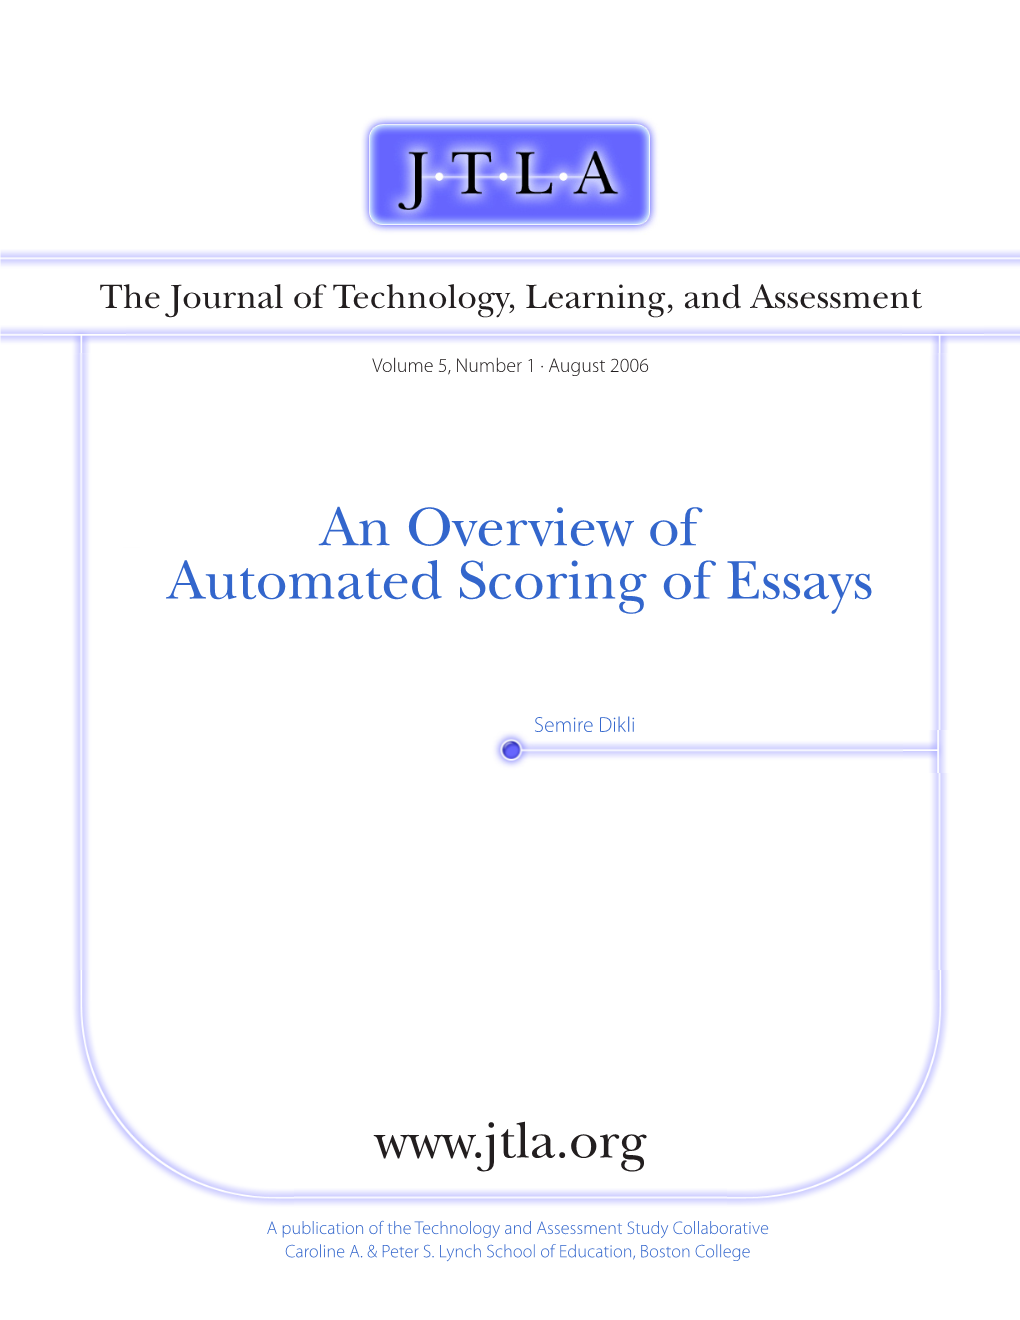 An Overview of Automated Scoring of Essays